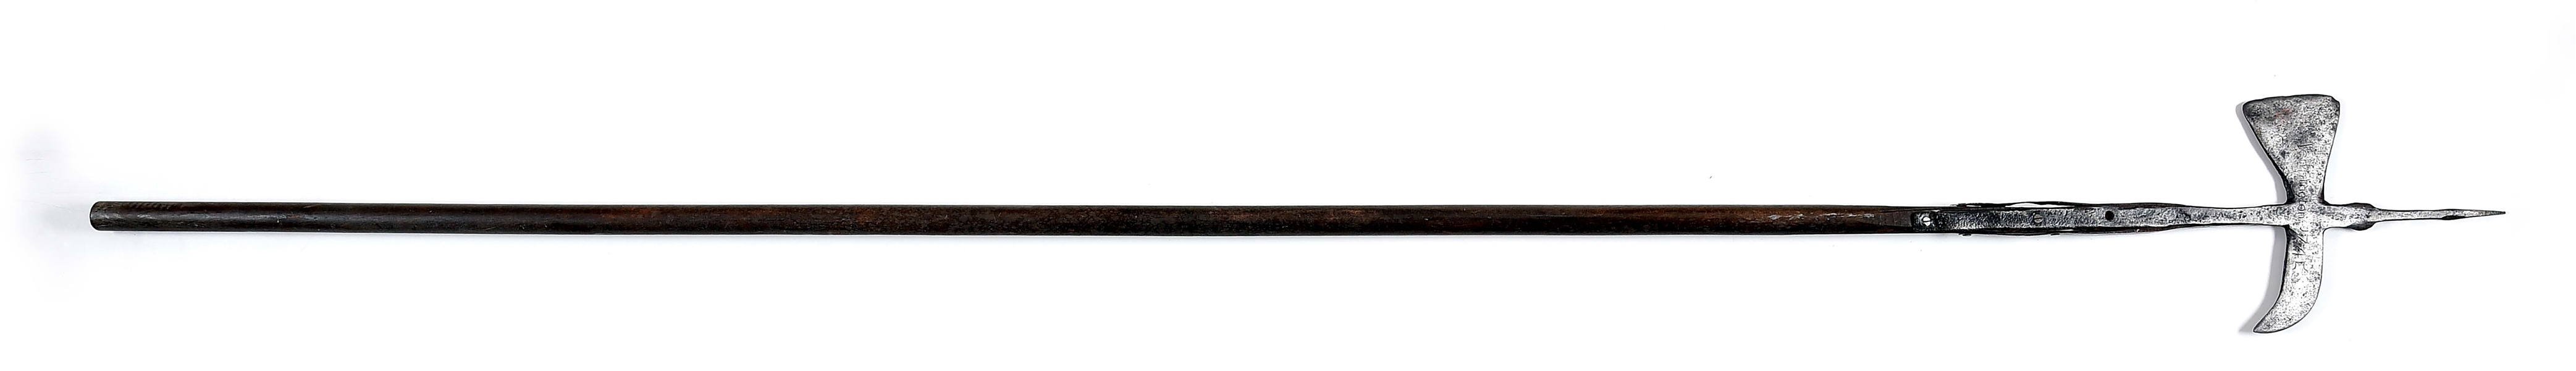 PRE-REVOLUTIONARY WAR AMERICAN HALBERD, SIGNED AND DATED, AND PICTURED IN "SWORDS & BLADES OF THE AMERICAN REVOLUTION" BY NEUMANN.